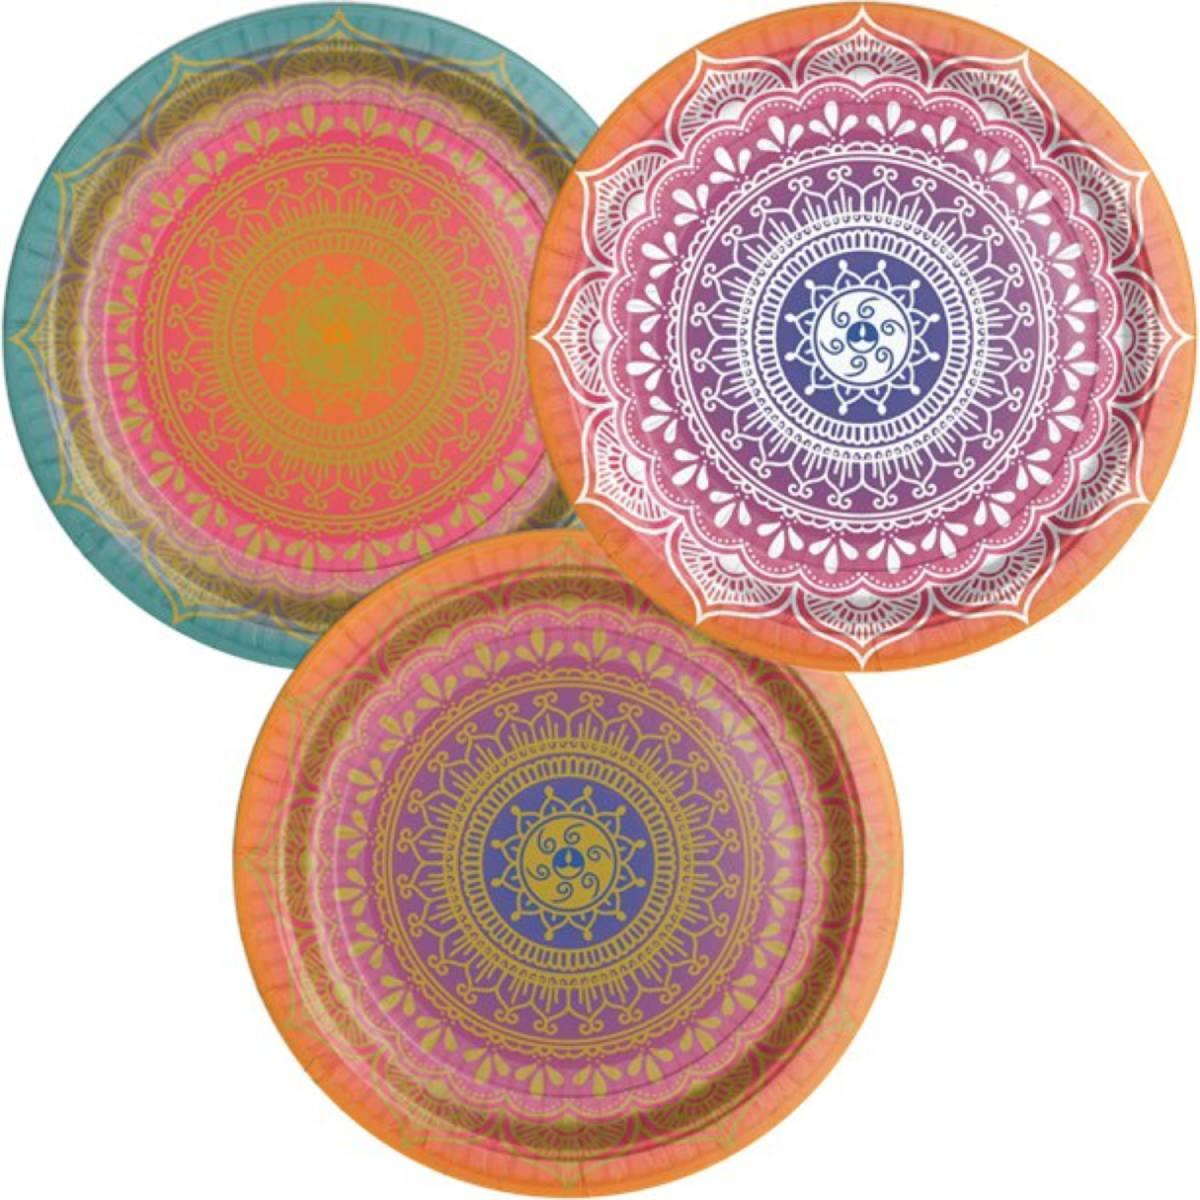 Diwali Celebration 23cm Paper Plates in 3 Designs (pk8) by Amscan 9914458 available here at Karnival Costumes online party shop